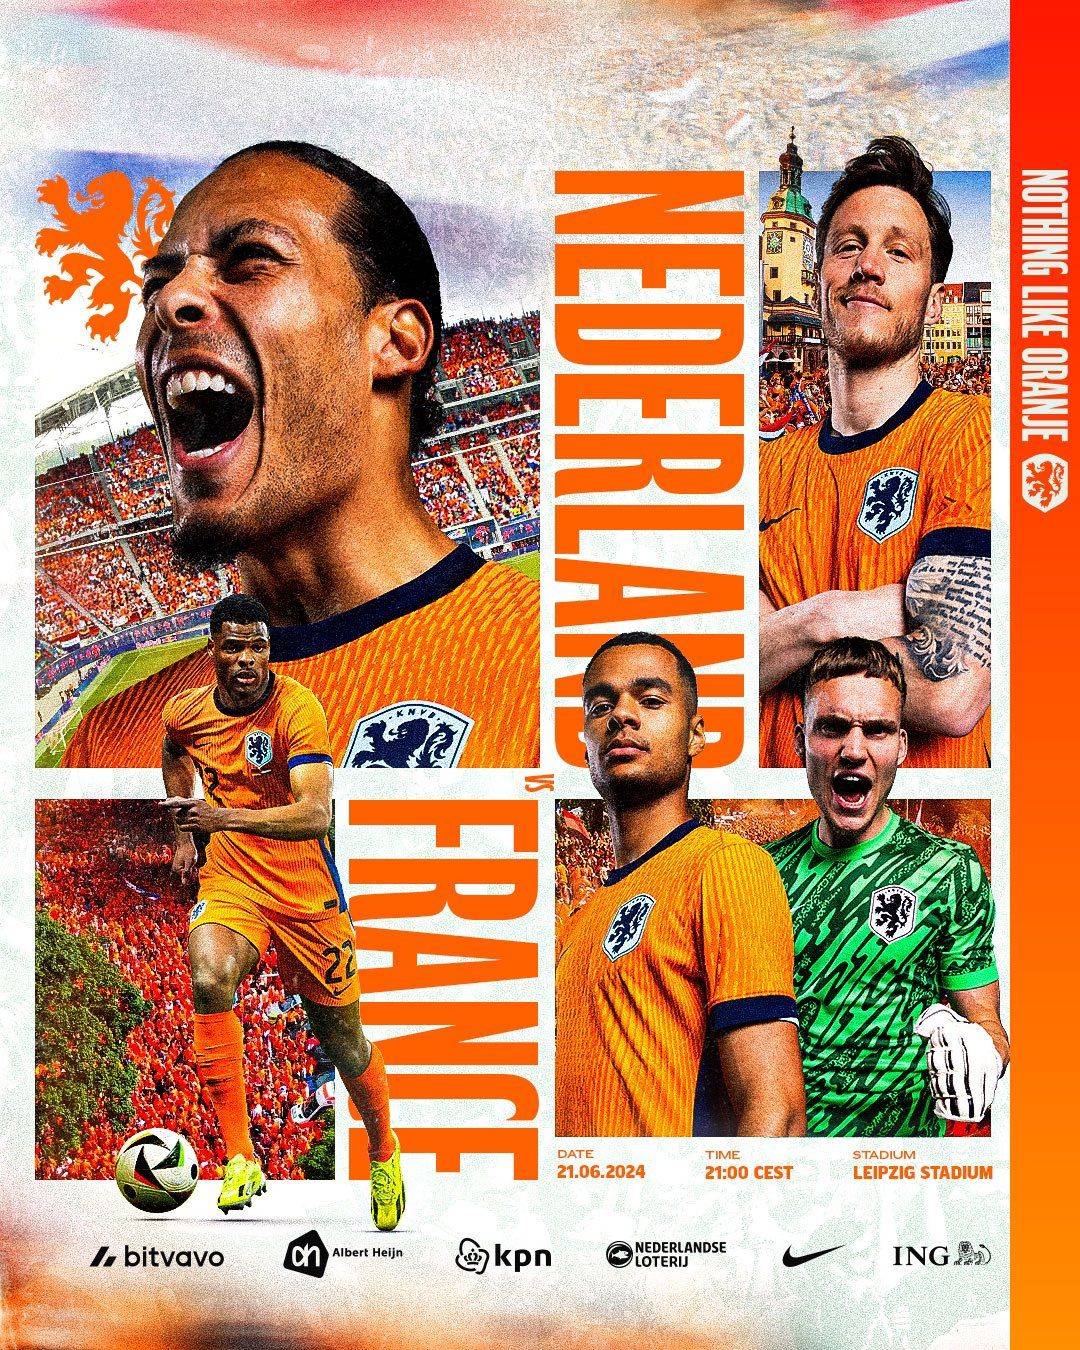 Striving for First Place! Netherlands Releases Poster Ahead of France Match: Van Dijk and Wout Weghorst Featured